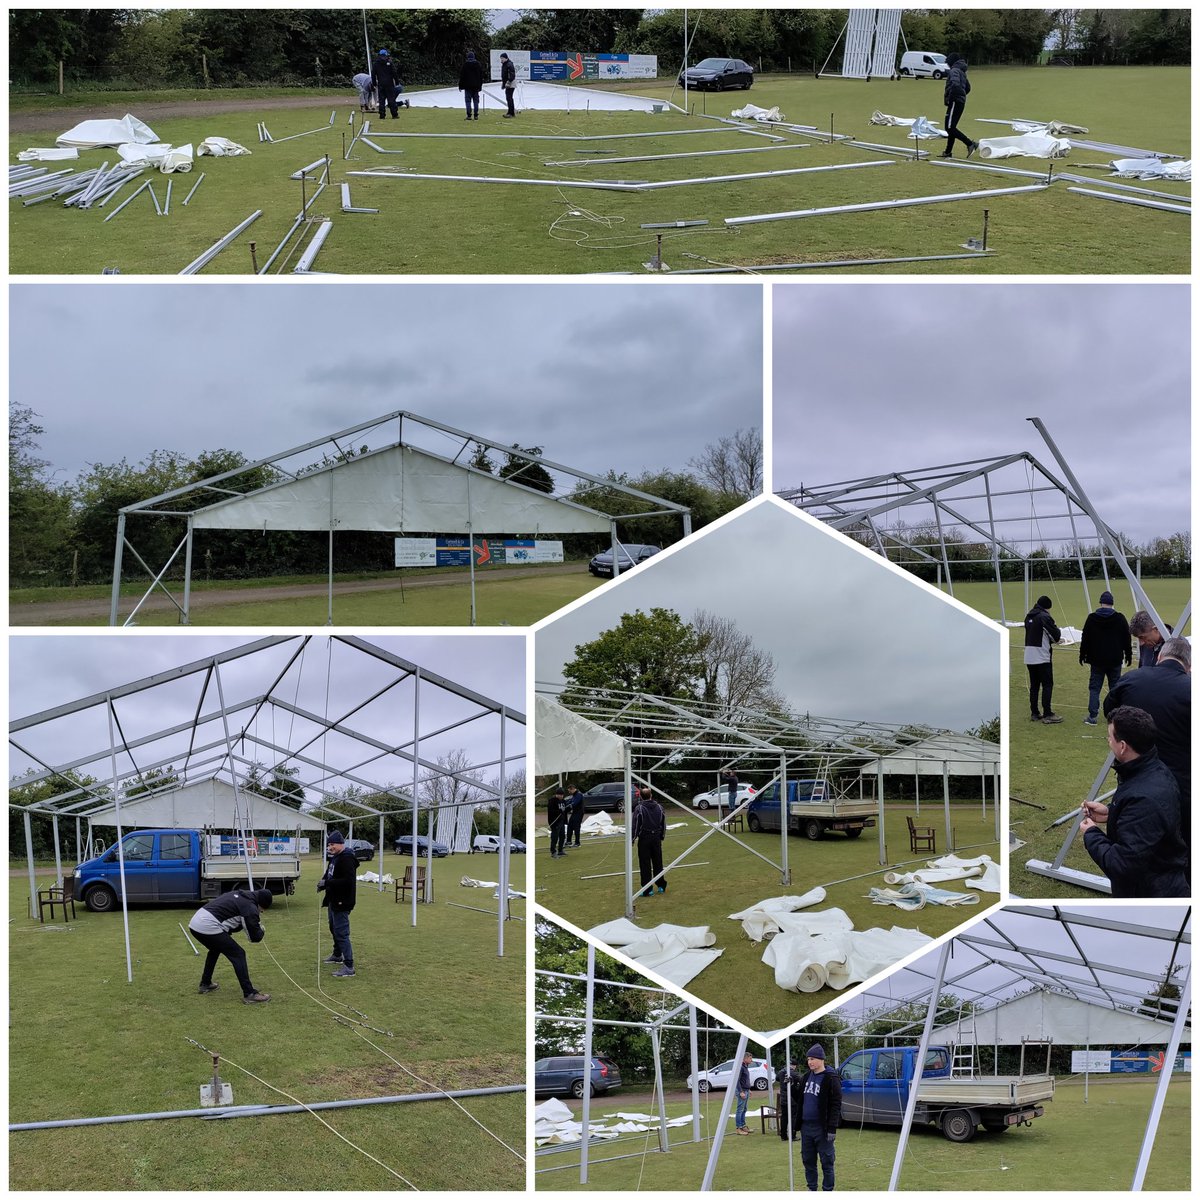 Marquee time at @dintoncricket ahead of the new season @BucksCricket